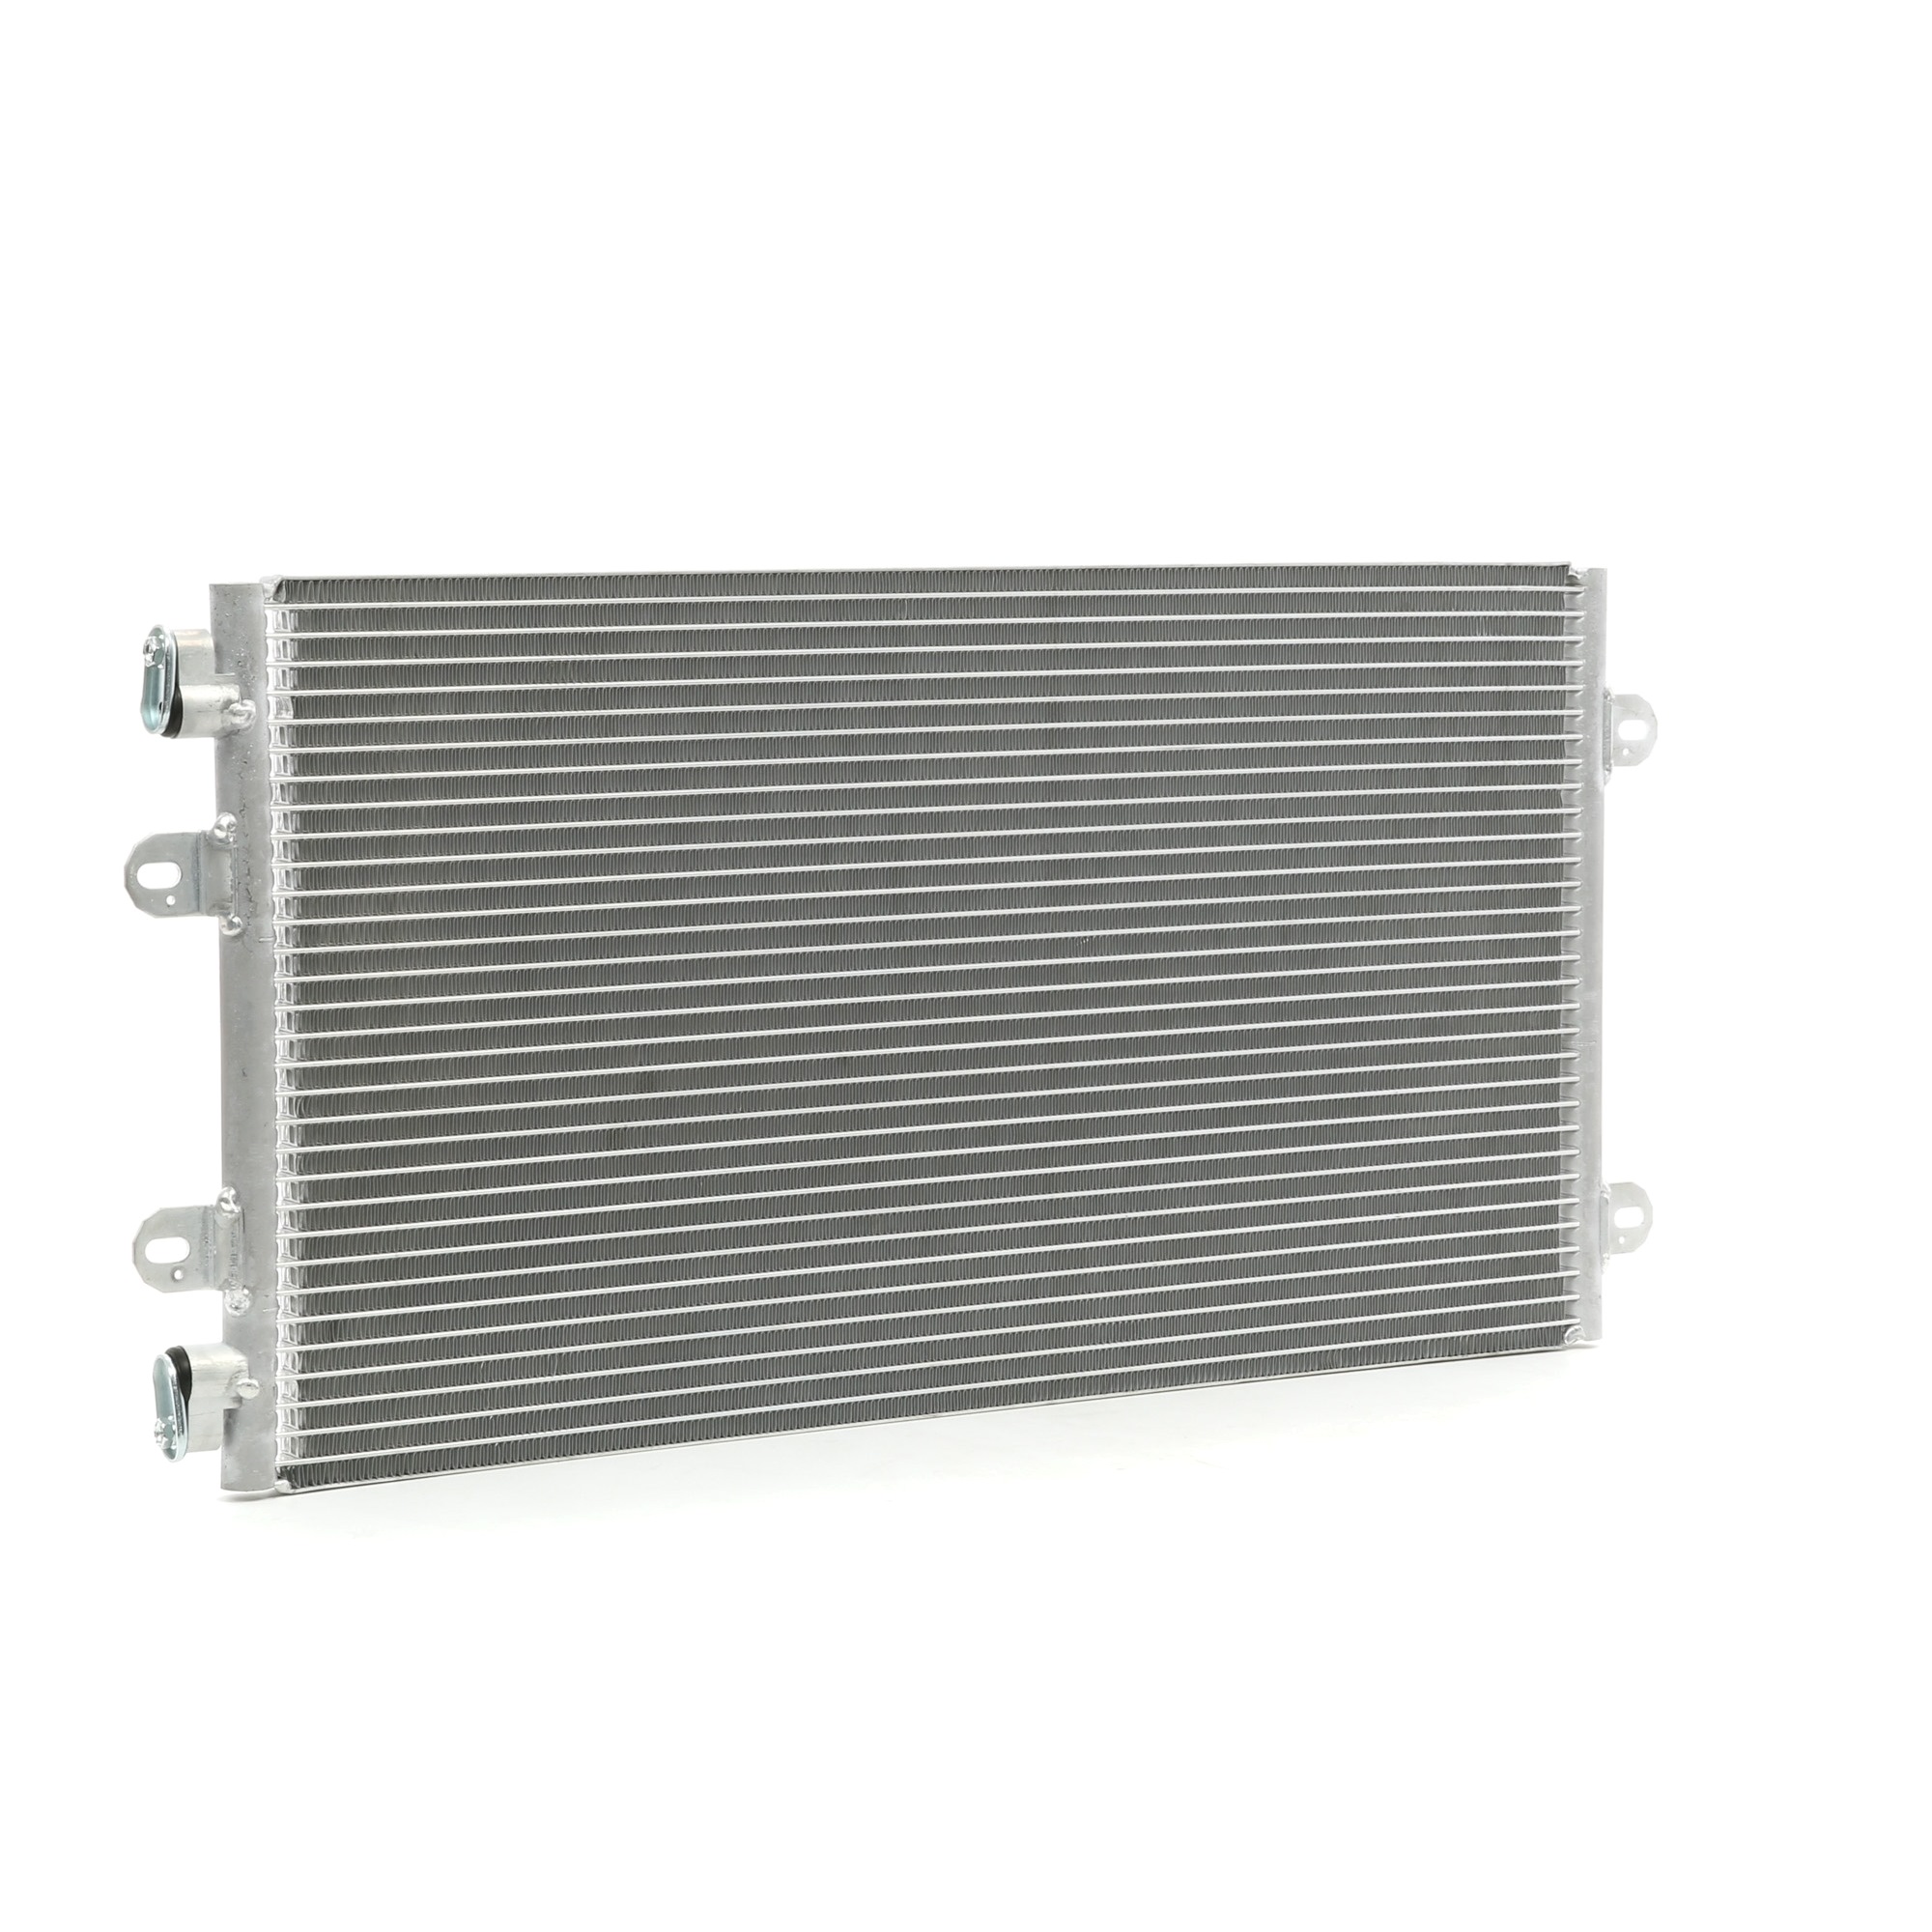 RIDEX 448C0238 Air conditioning condenser without dryer, 608x321x16, 15,5mm, 15,5mm, Aluminium, R 134a